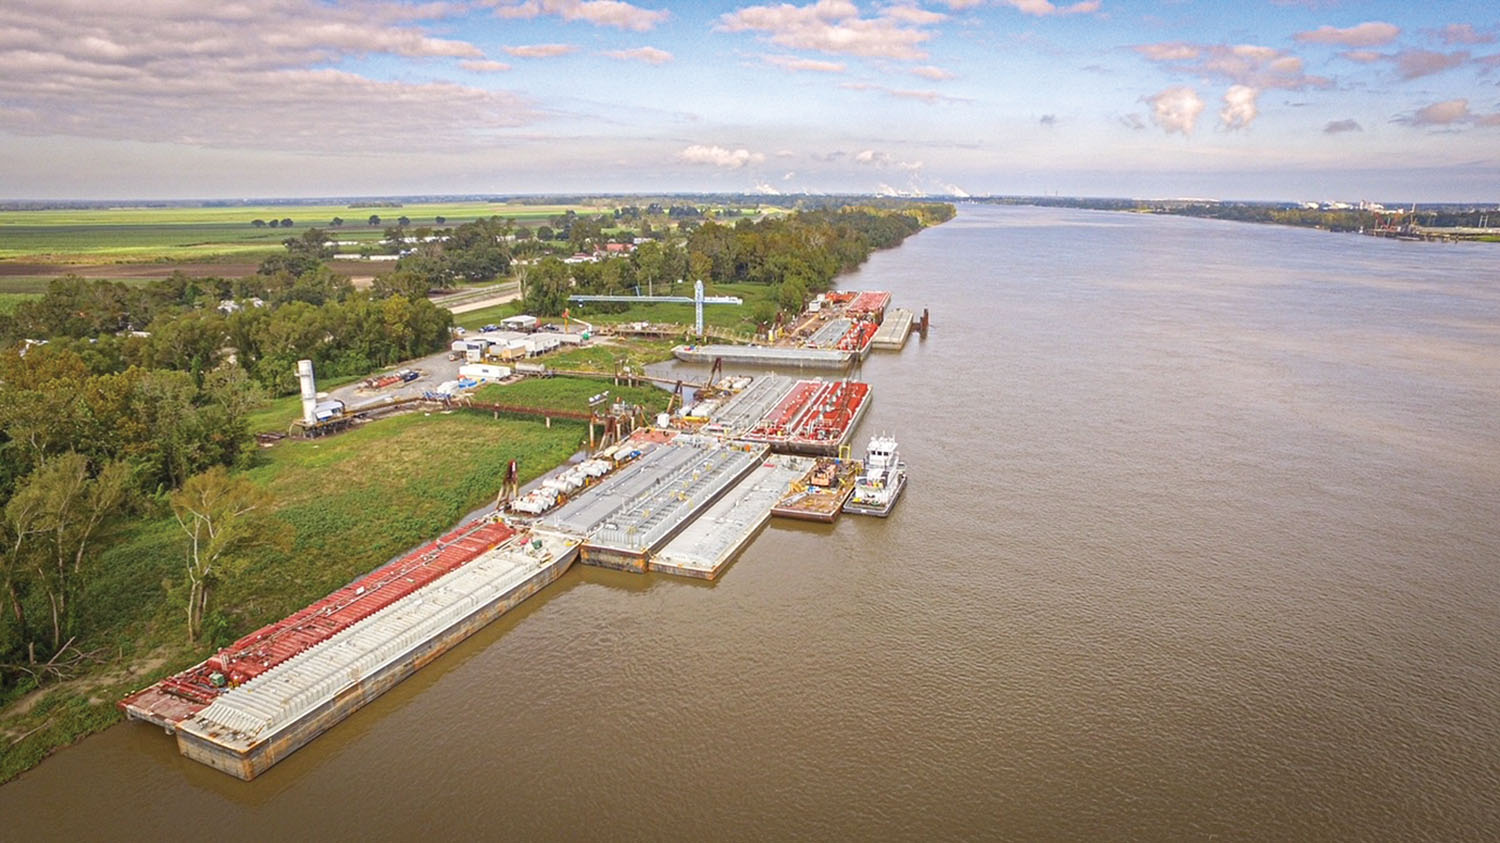 James Marine acquired T.T. Barge Cleaning LLC at Lower Mississippi Mile 183, shown here, along with T.T. Barge Services. (Photo courtesy of James Marine)